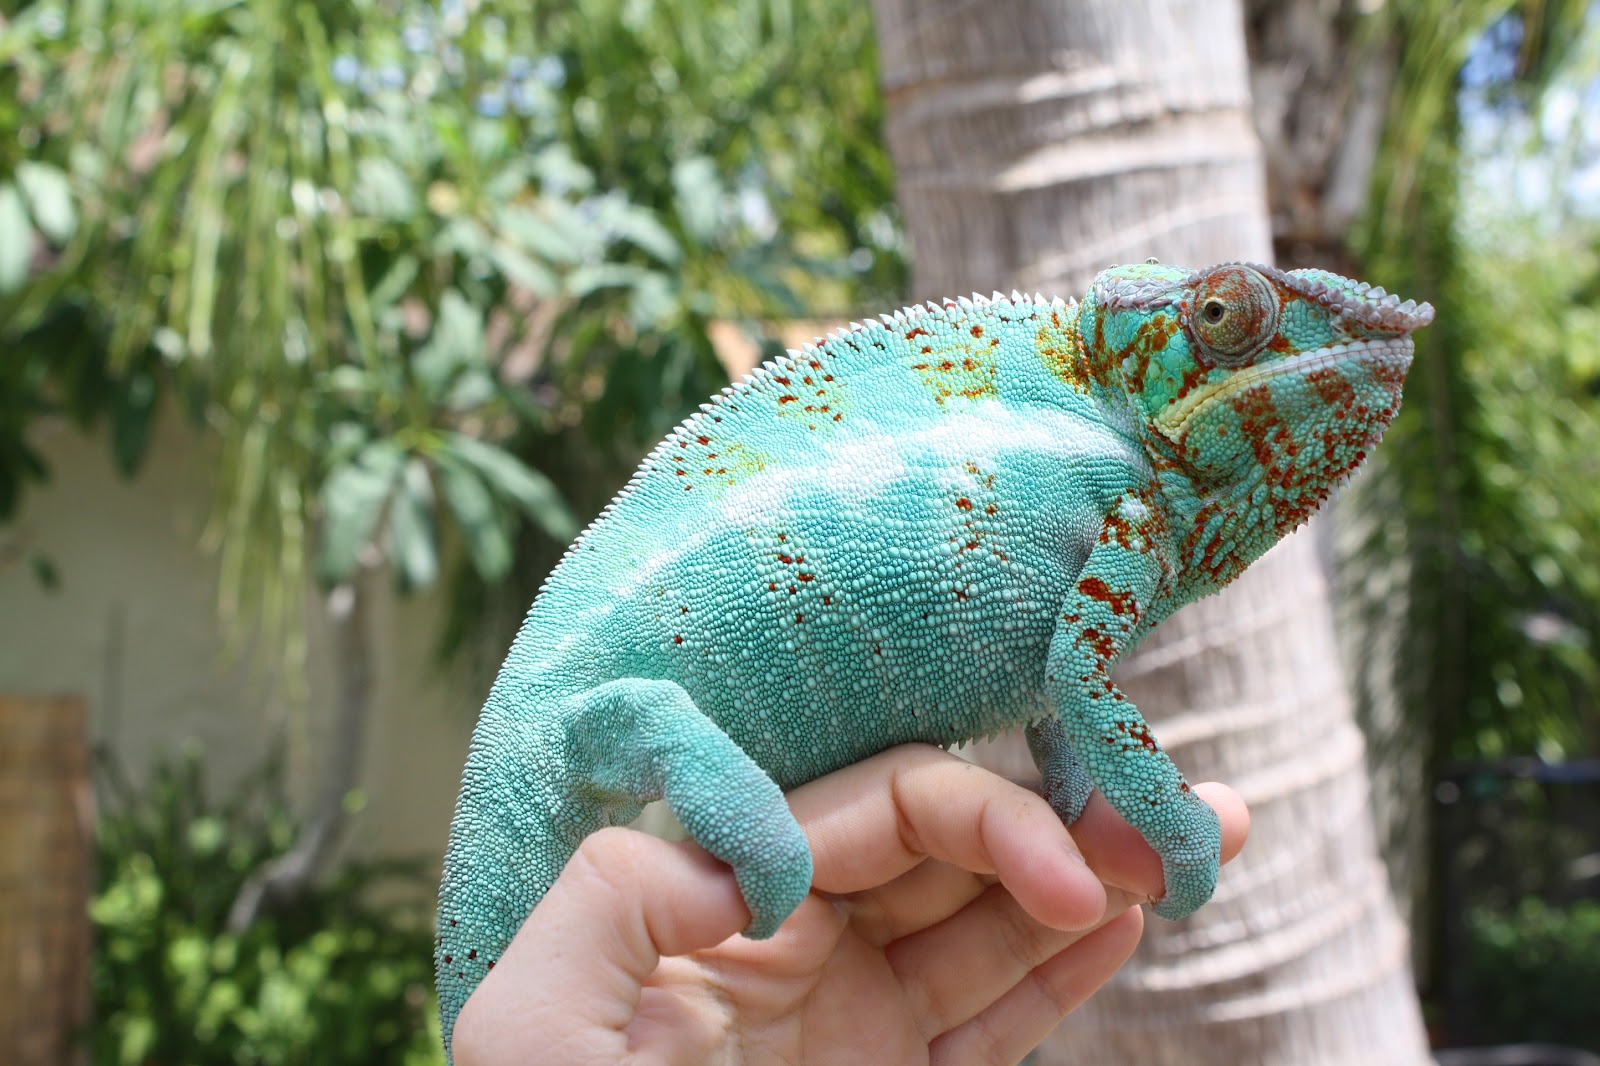 What are some tips for caring for a pet chameleon?